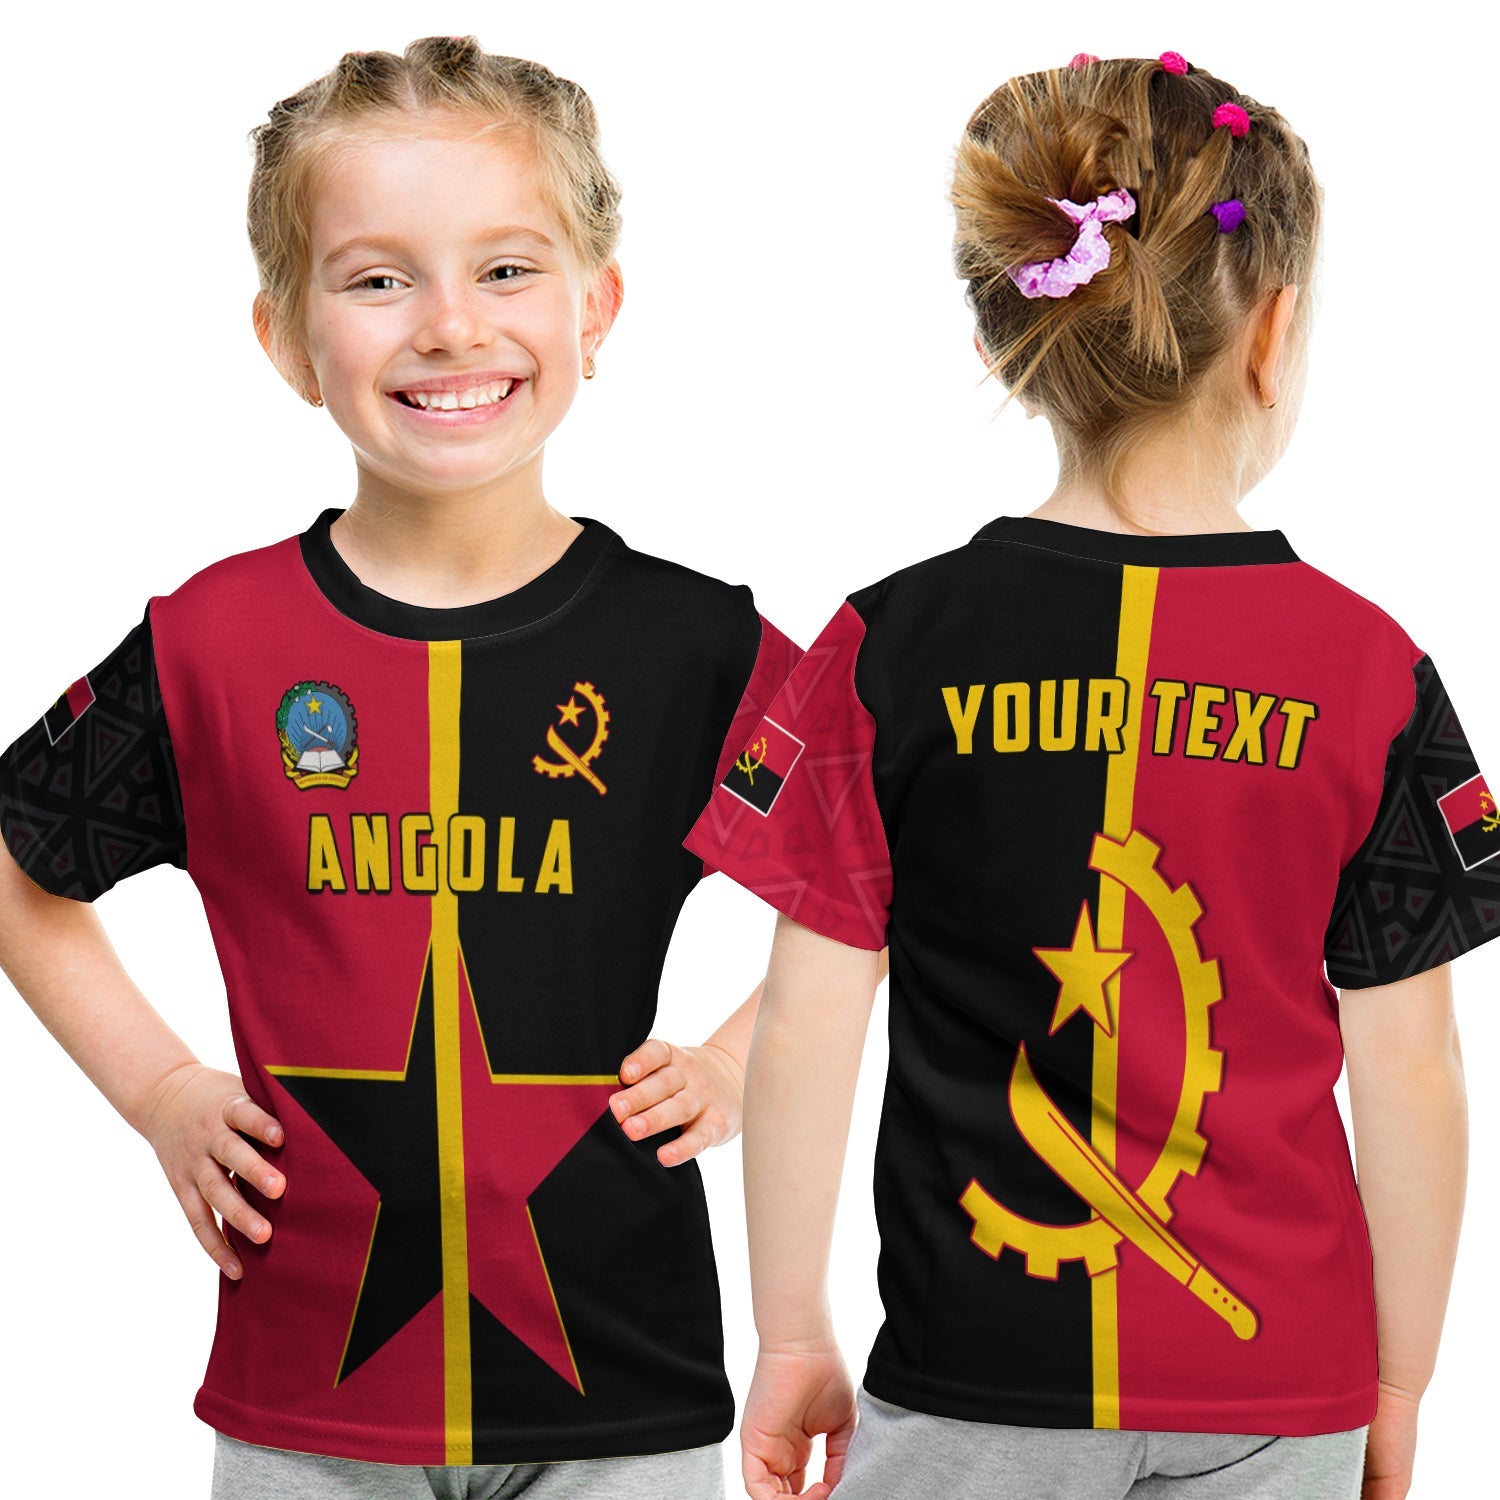 custom-personalised-angola-t-shirt-kid-star-and-flag-style-sporty